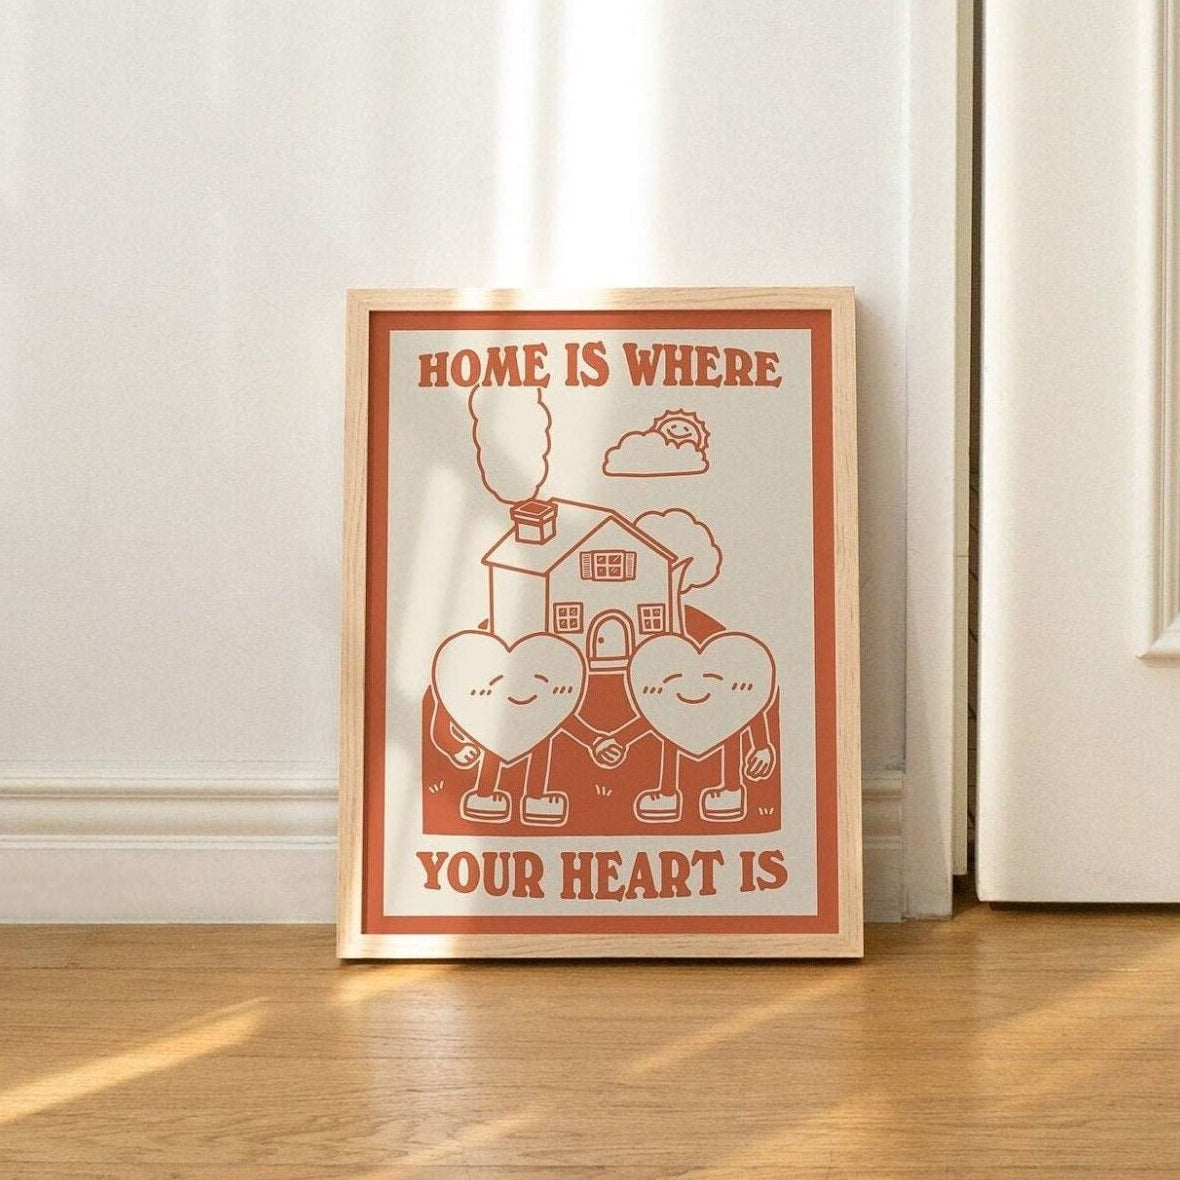 'Home Is Where Your Heart Is' Print - Art Prints - Kinder Planet Company